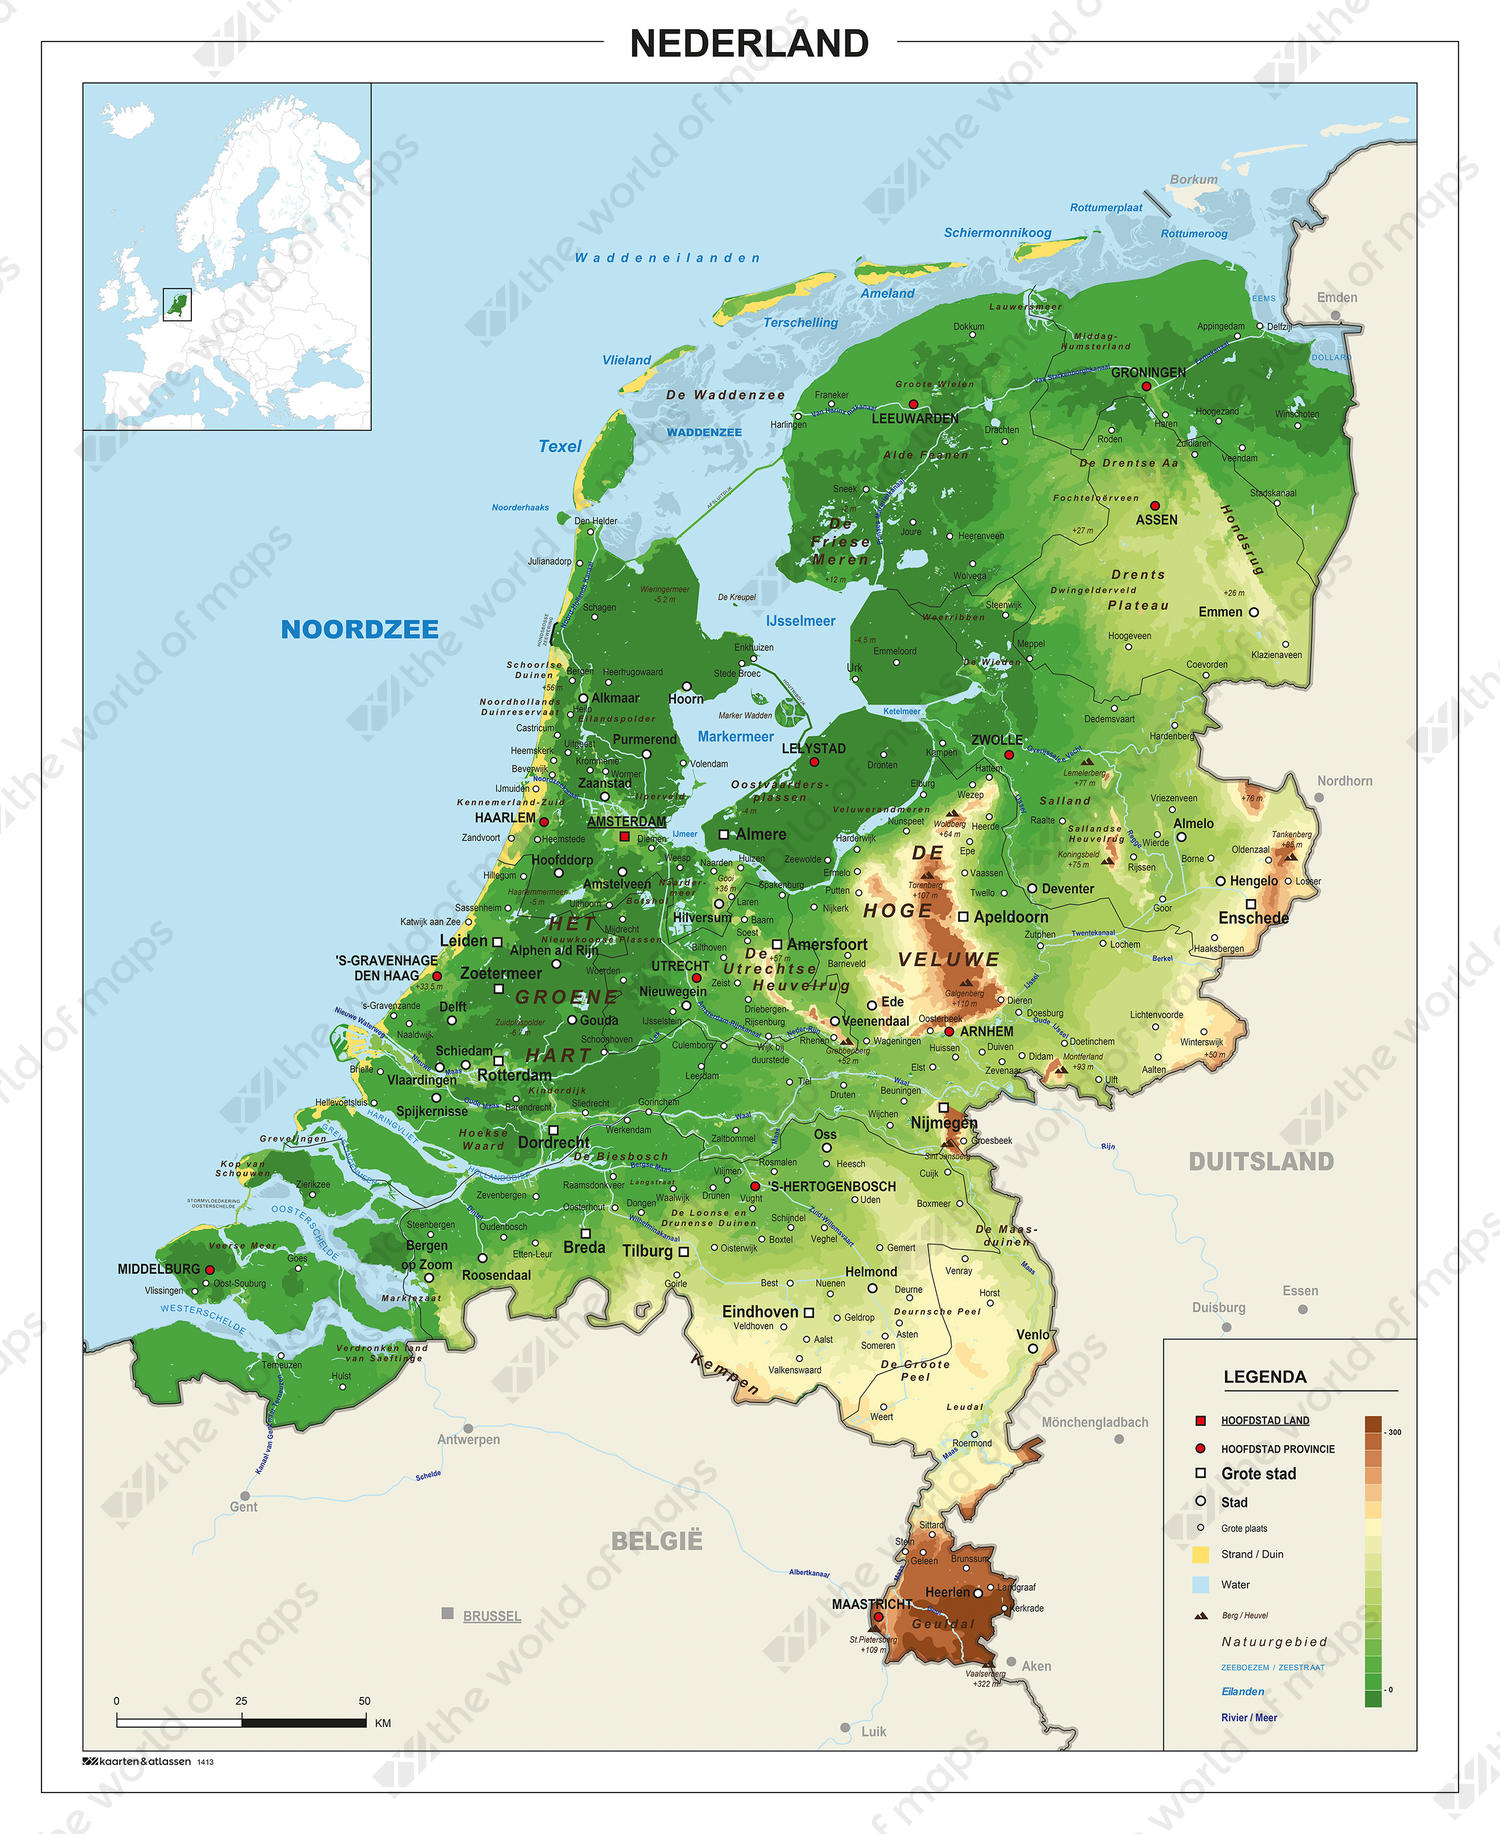 Netherlands Physical Features